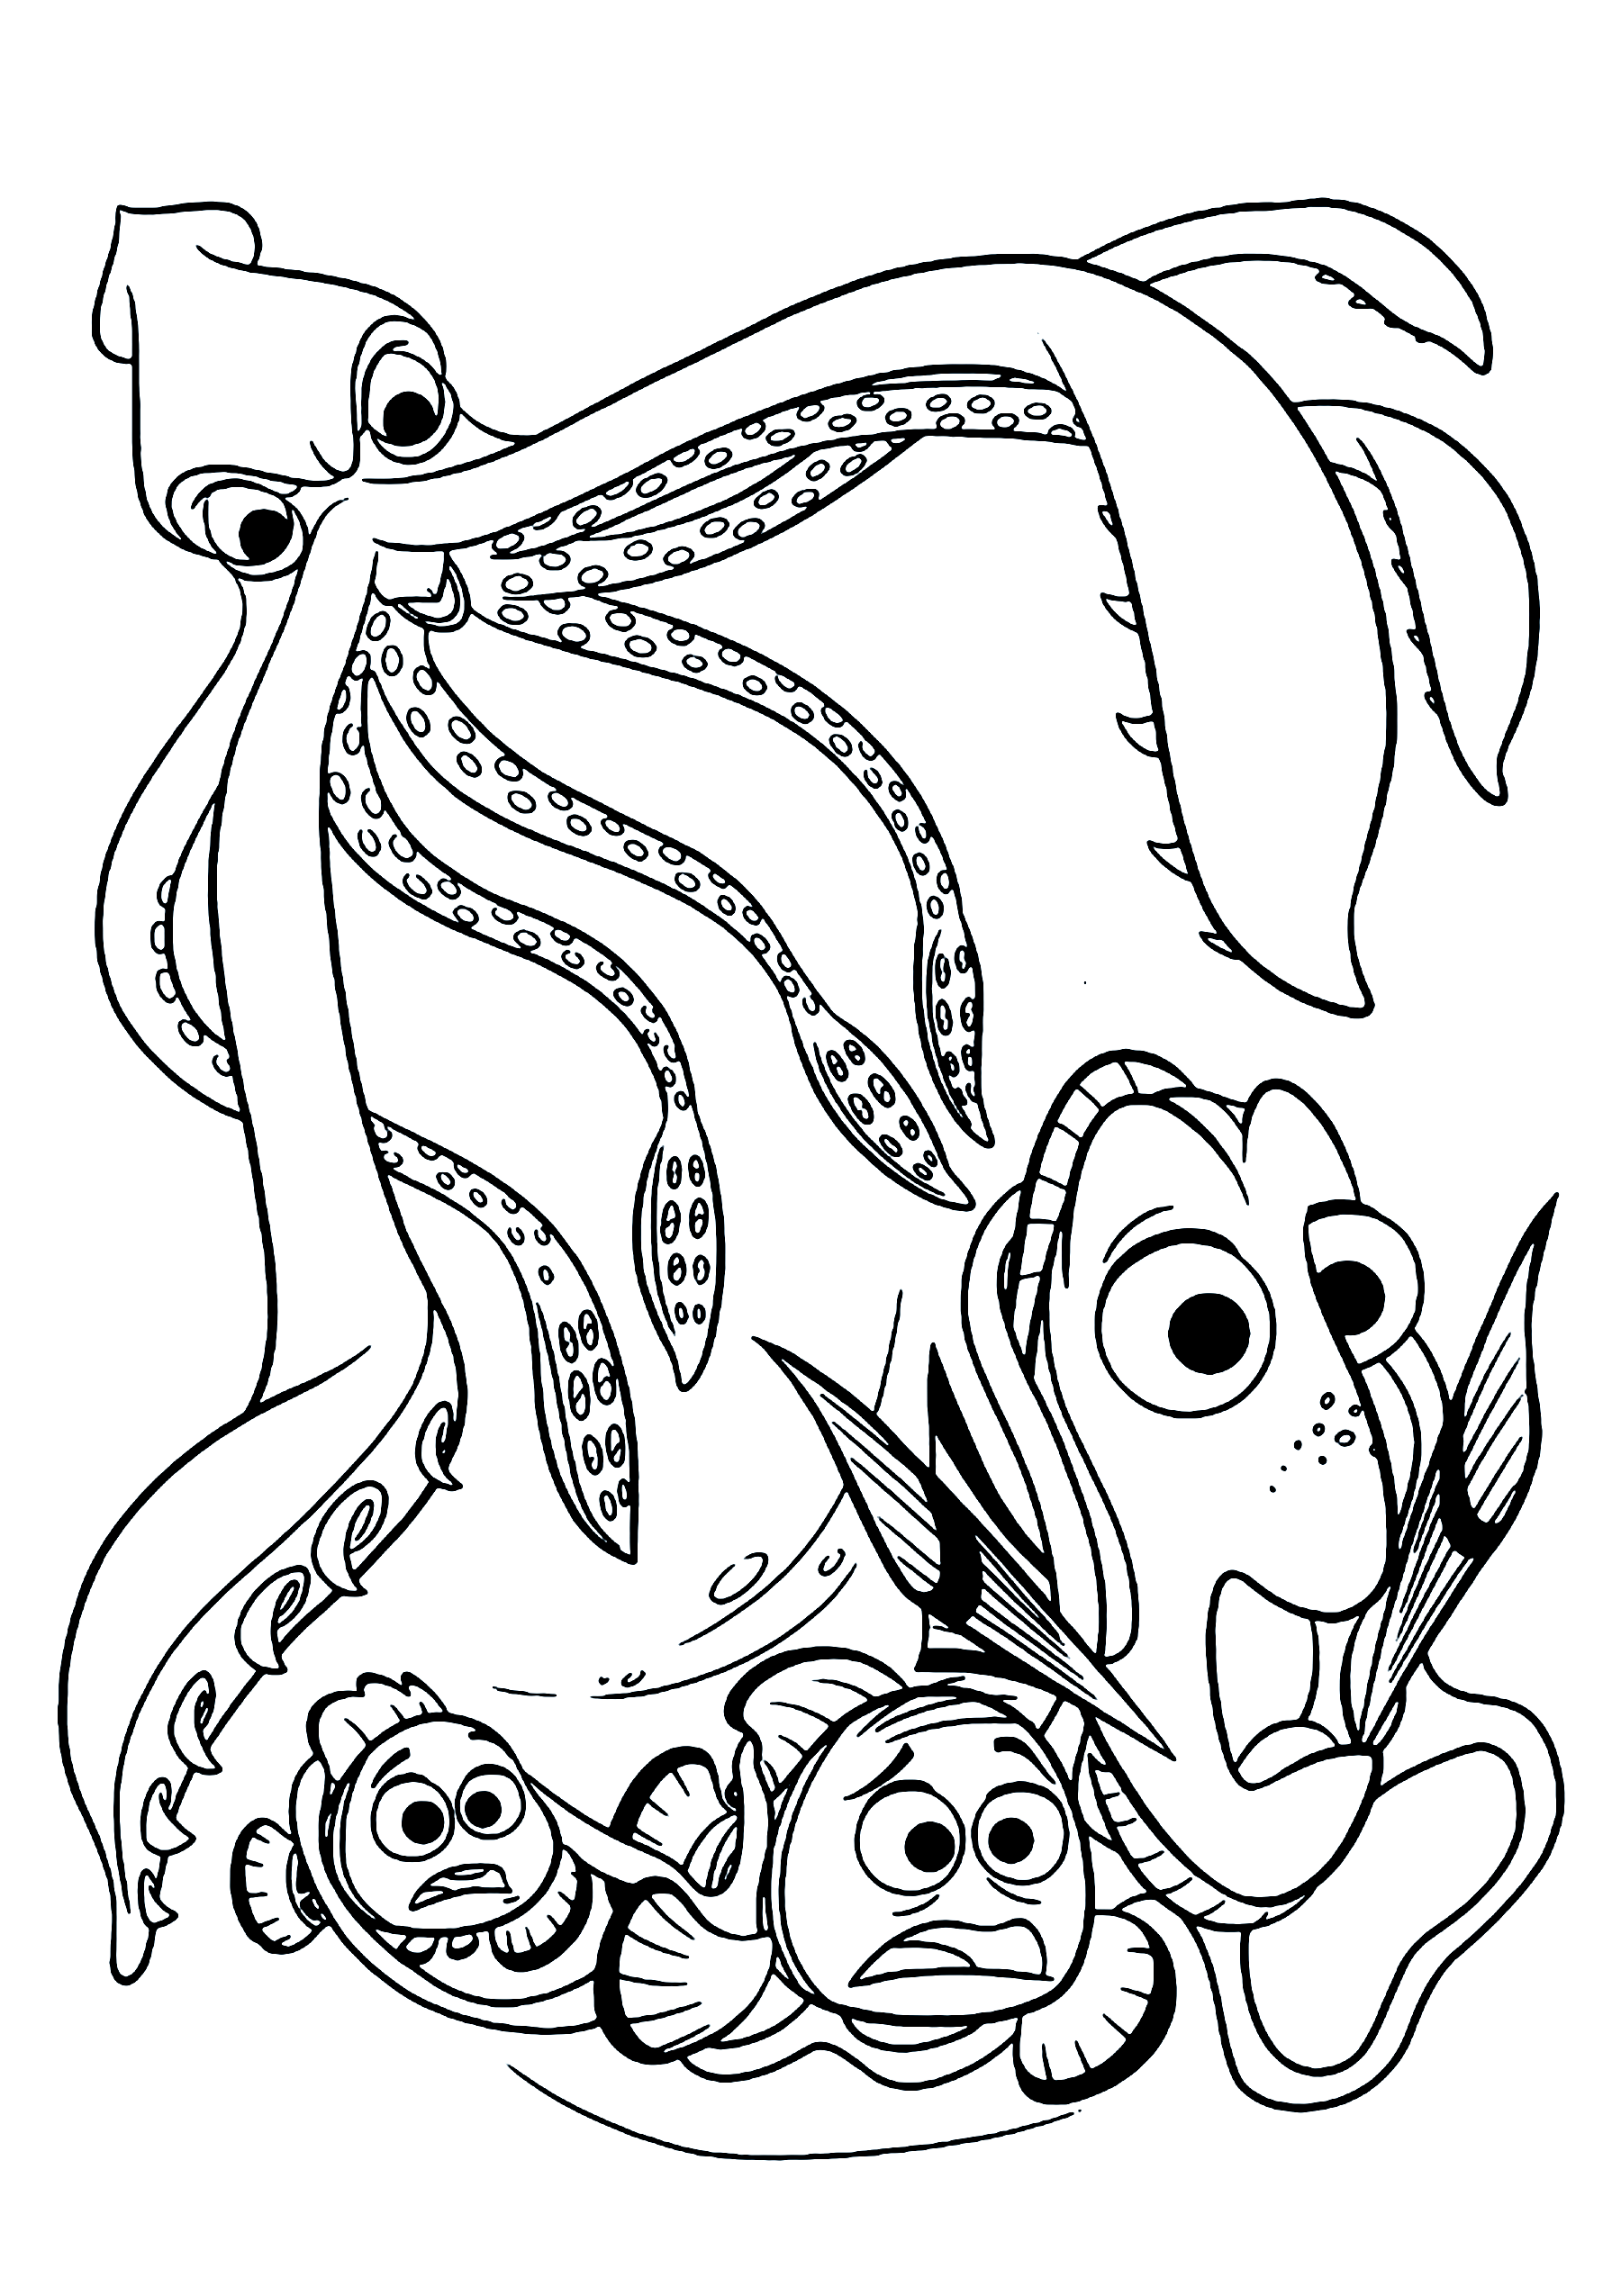 Nemo Marlin and Dory AdventureTime with Octopus Coloring Page